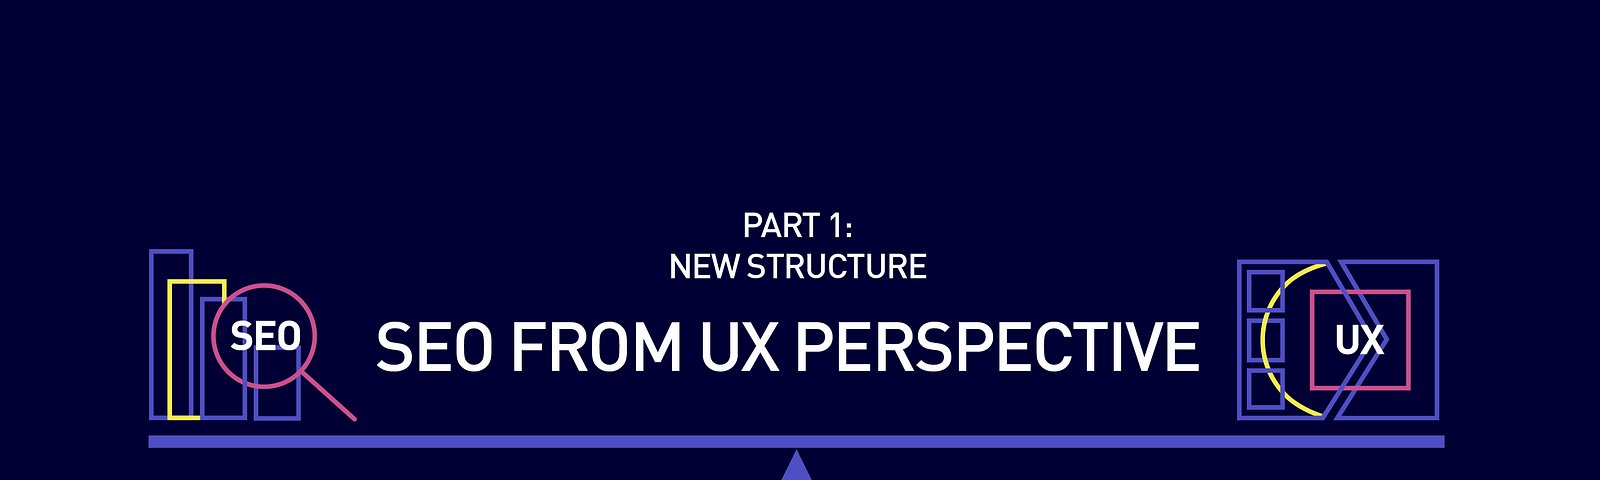 Thumbnail SEO from UX perspective Part 1